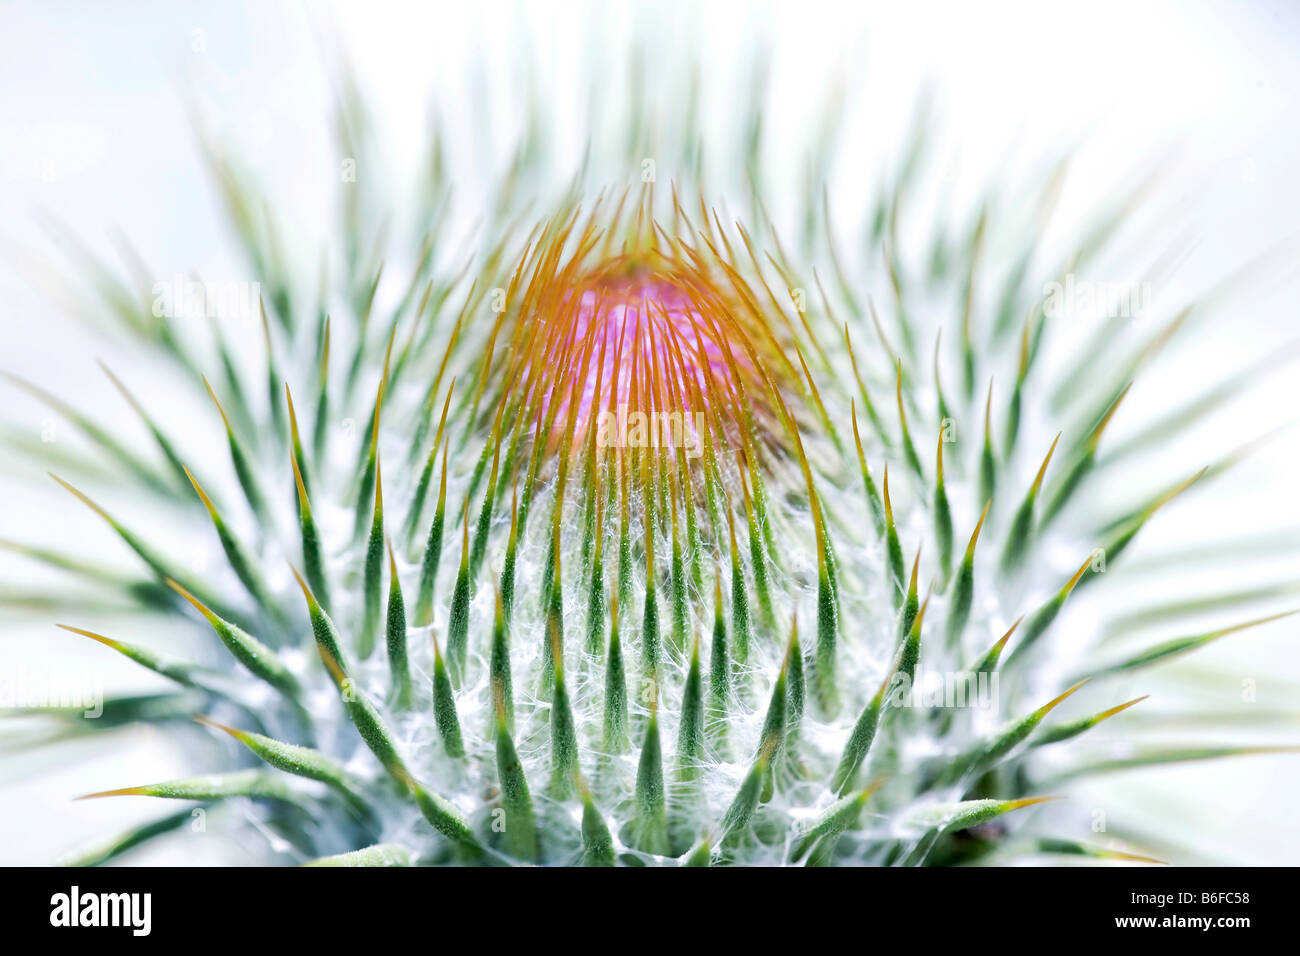 Opening blossom of a thistle (Onopordum) Stock Photo